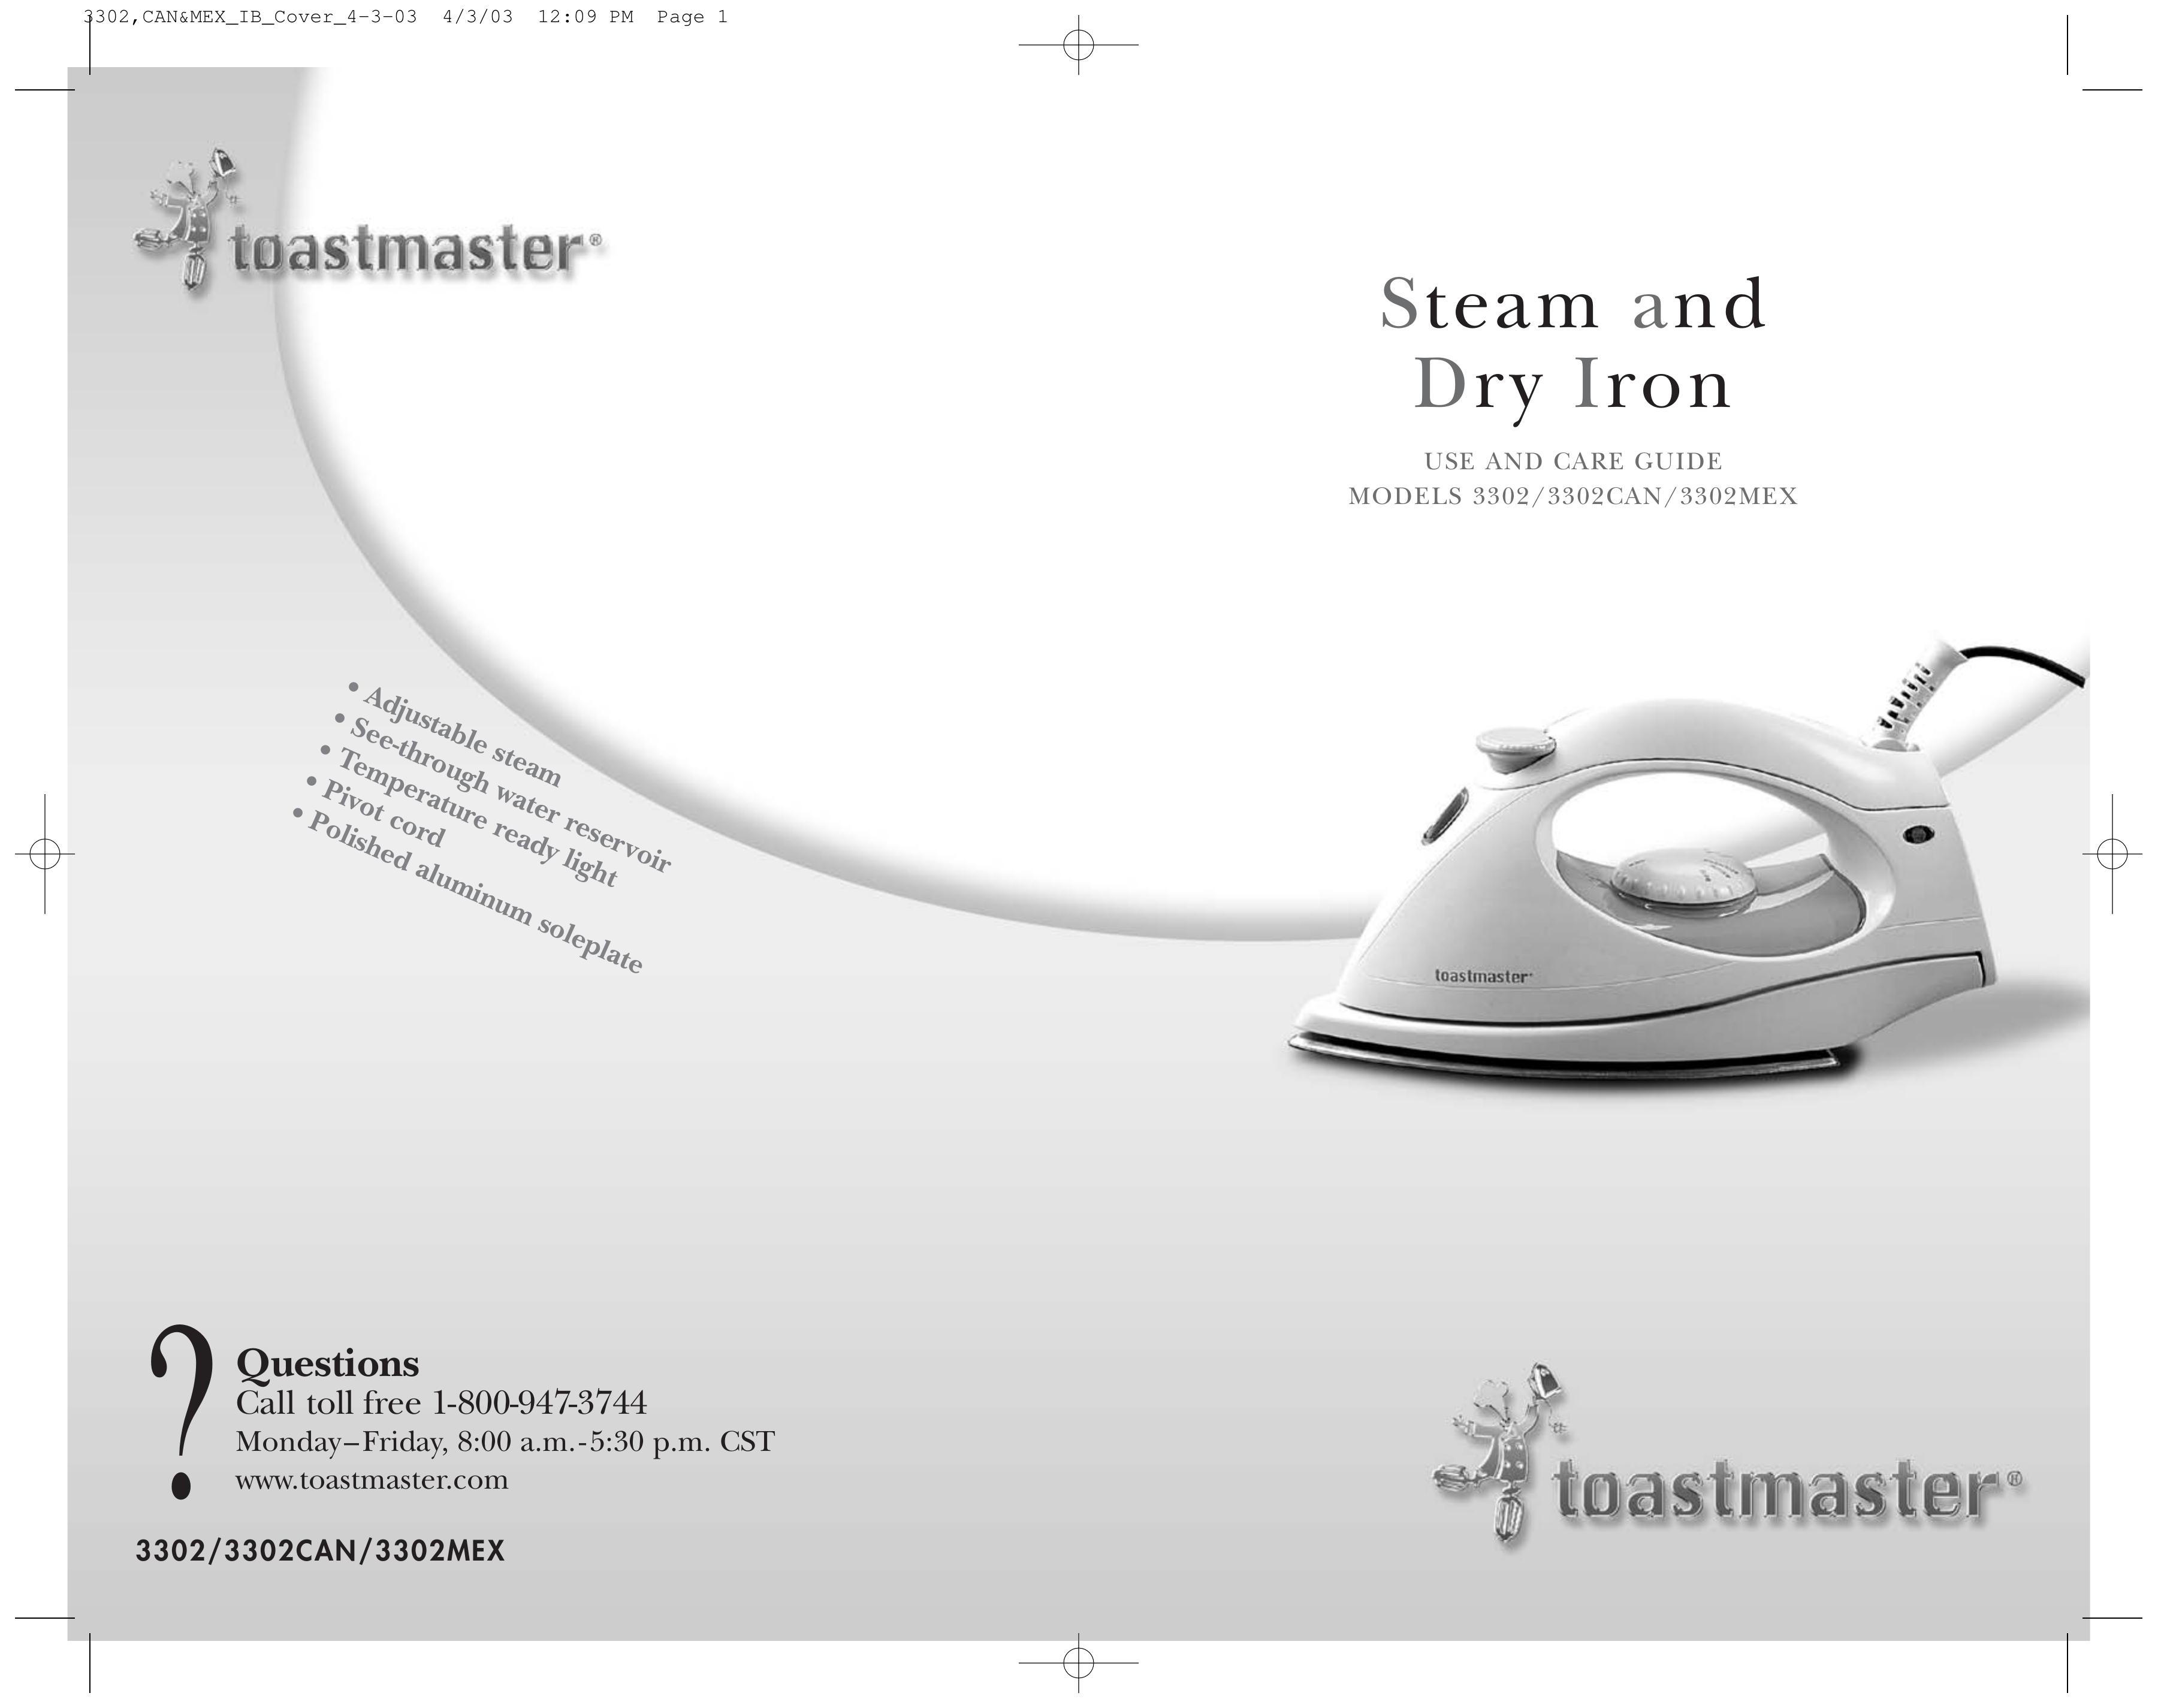 Toastmaster 3302CAN Iron User Manual